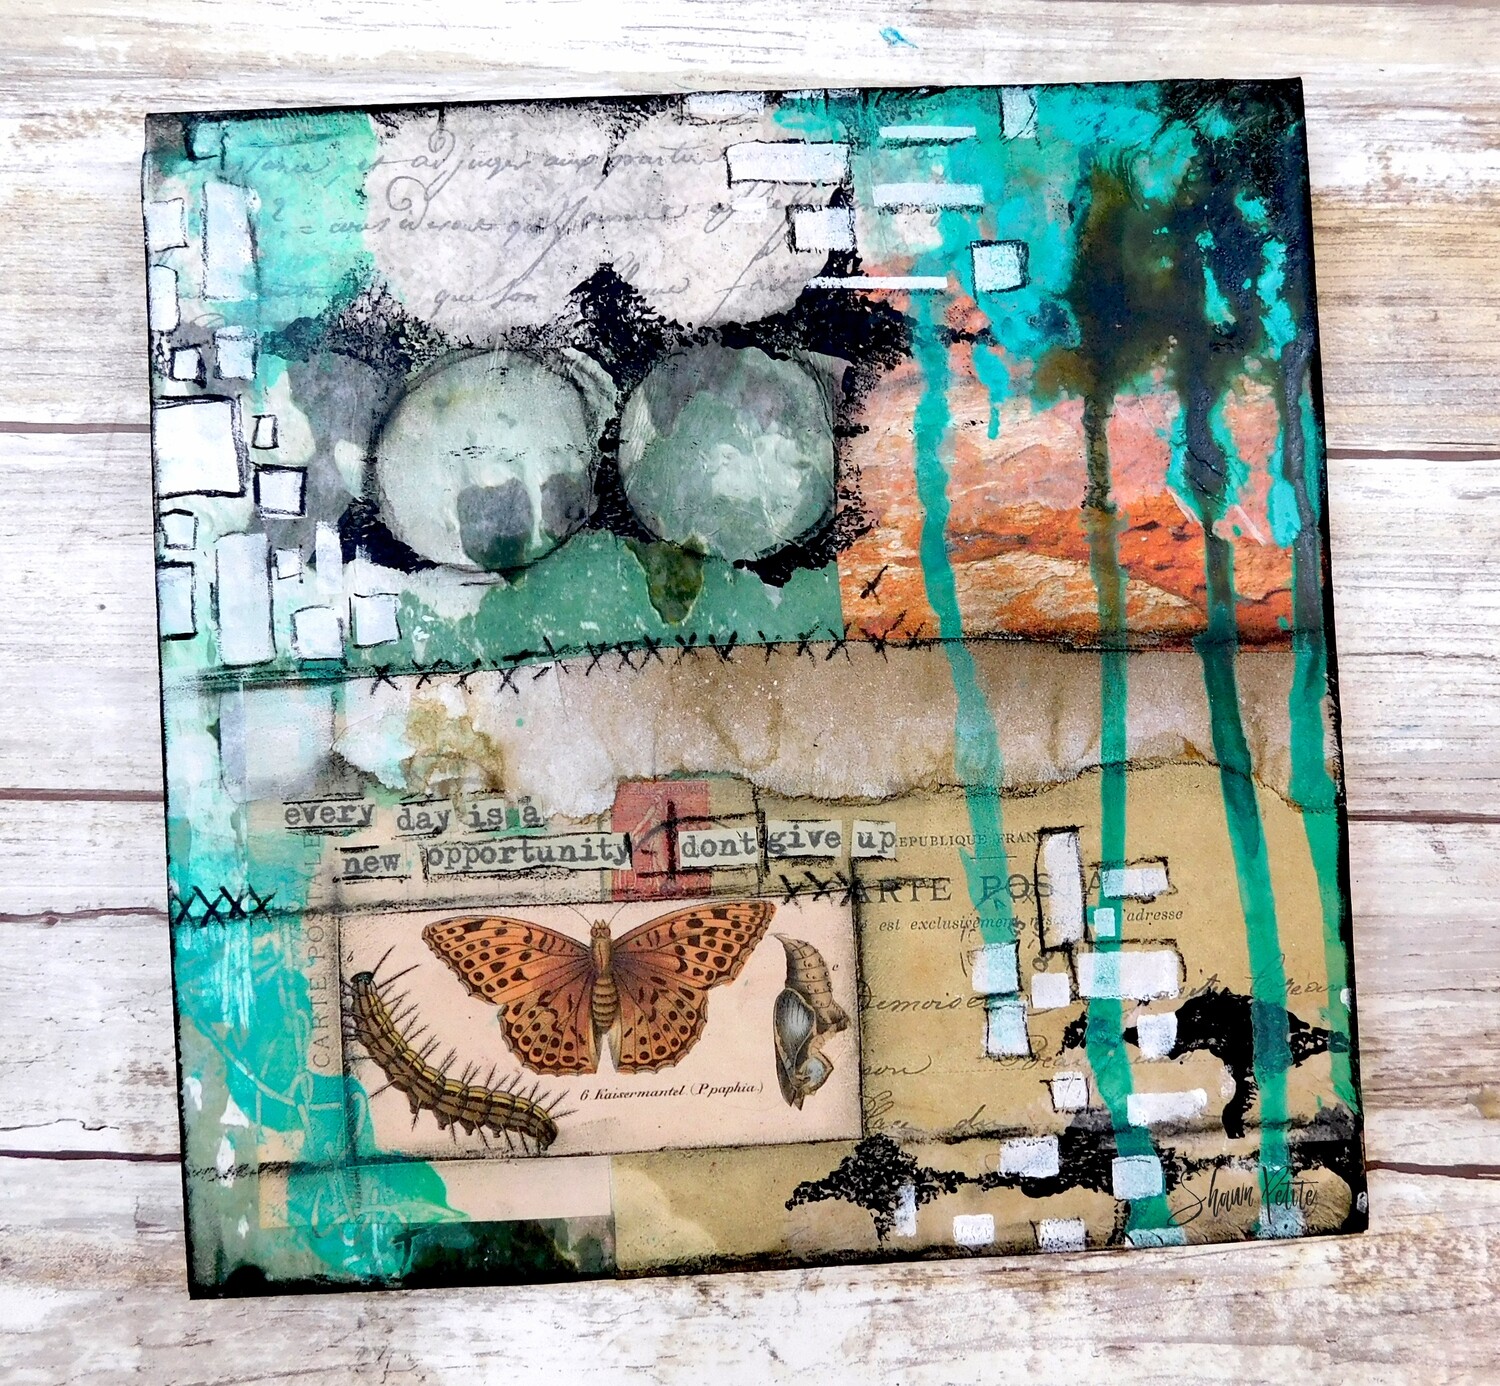 "Every day is a new opportunity" 8x8 mixed media original